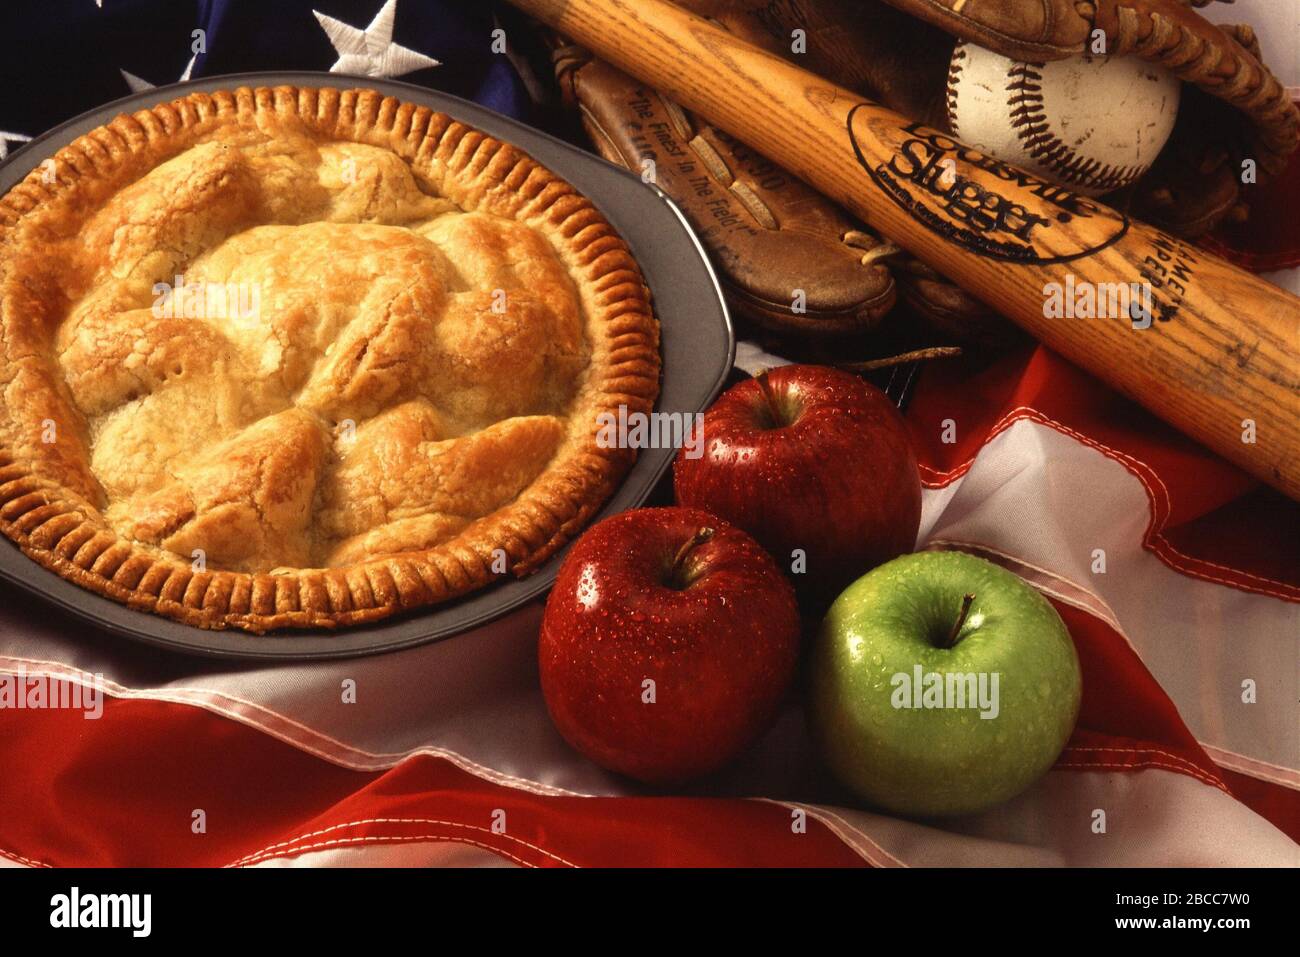 'English:  Image title: Apples apple pie Image from Public domain images website, http://www.public-domain-image.com/full-image/still-life-public-domain-images-pictures/apples-apple-pie.jpg.html; Not given  Transferred by Fæ on 2013-02-28; http://www.public-domain-image.com/public-domain-images-pictures-free-stock-photos/still-life-public-domain-images-pictures/apples-apple-pie.jpg; Scott Bauer, U.S. Department of Agriculture; ' Stock Photo